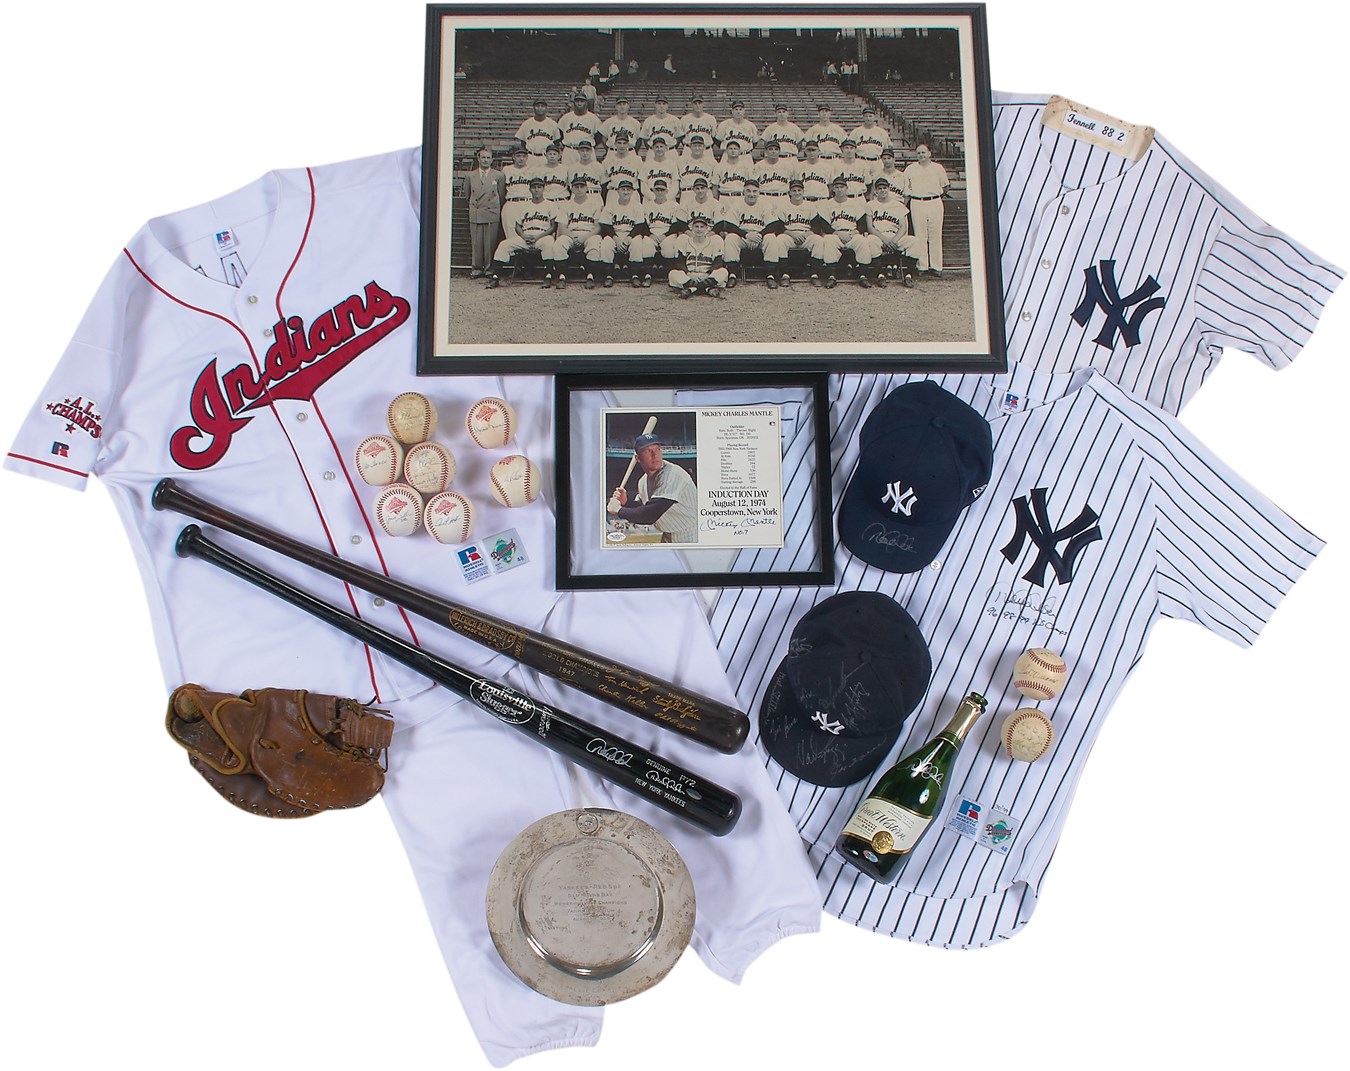 Baseball Equipment - Massive 1940s Allie Clark Collection from Family Member with 1947 World Series Glove (70+)